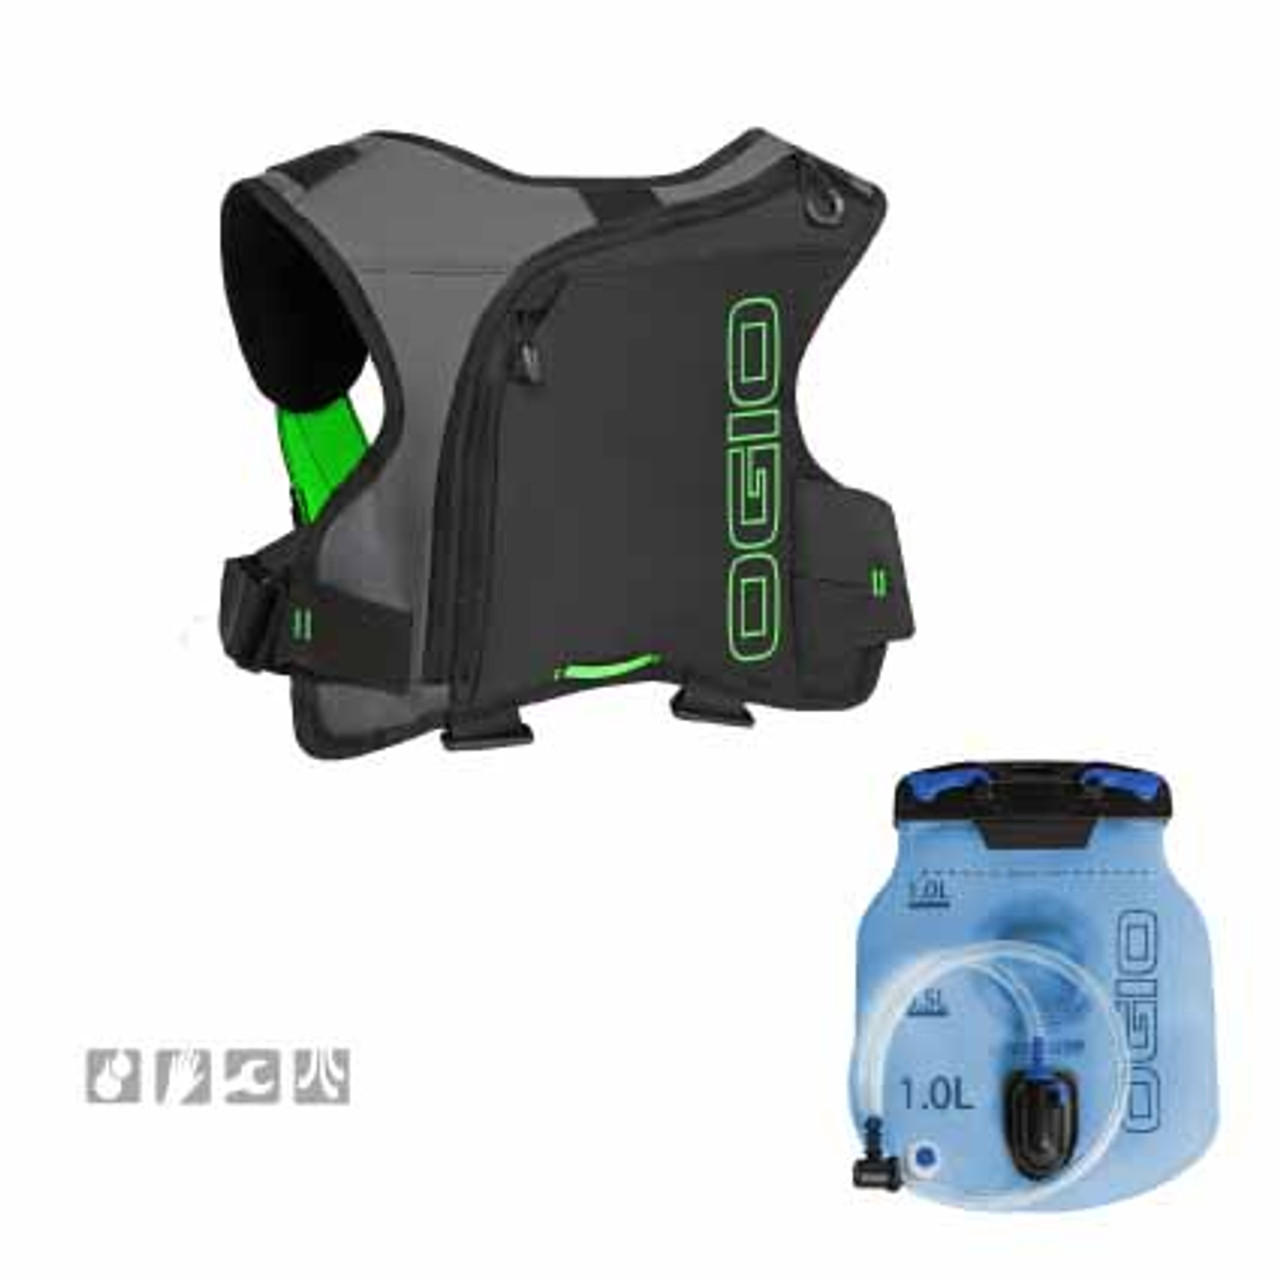 Ogio Erzberg 1L Hydration Pack, in Black colourway, comes with a 1L bladder